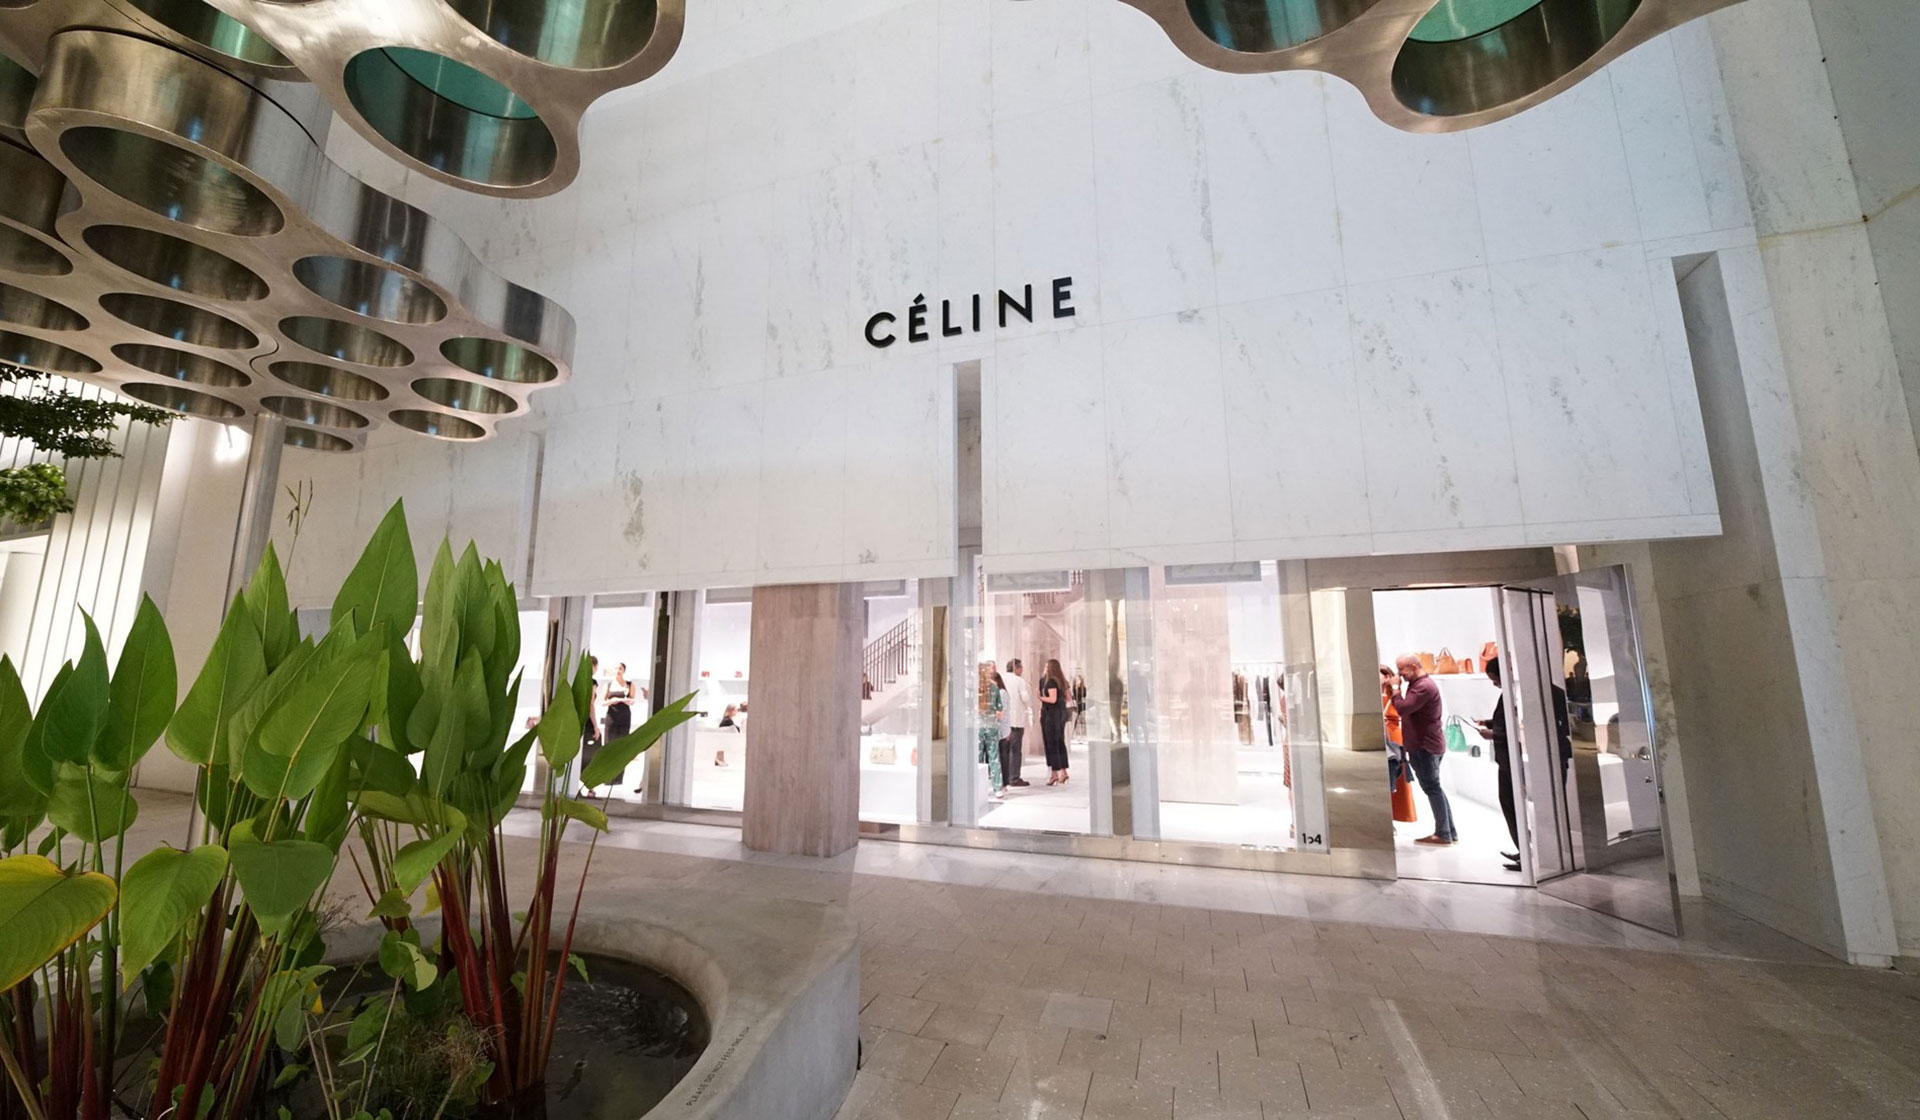 Where to Shop in Miami - Best Luxury Shopping in Miami